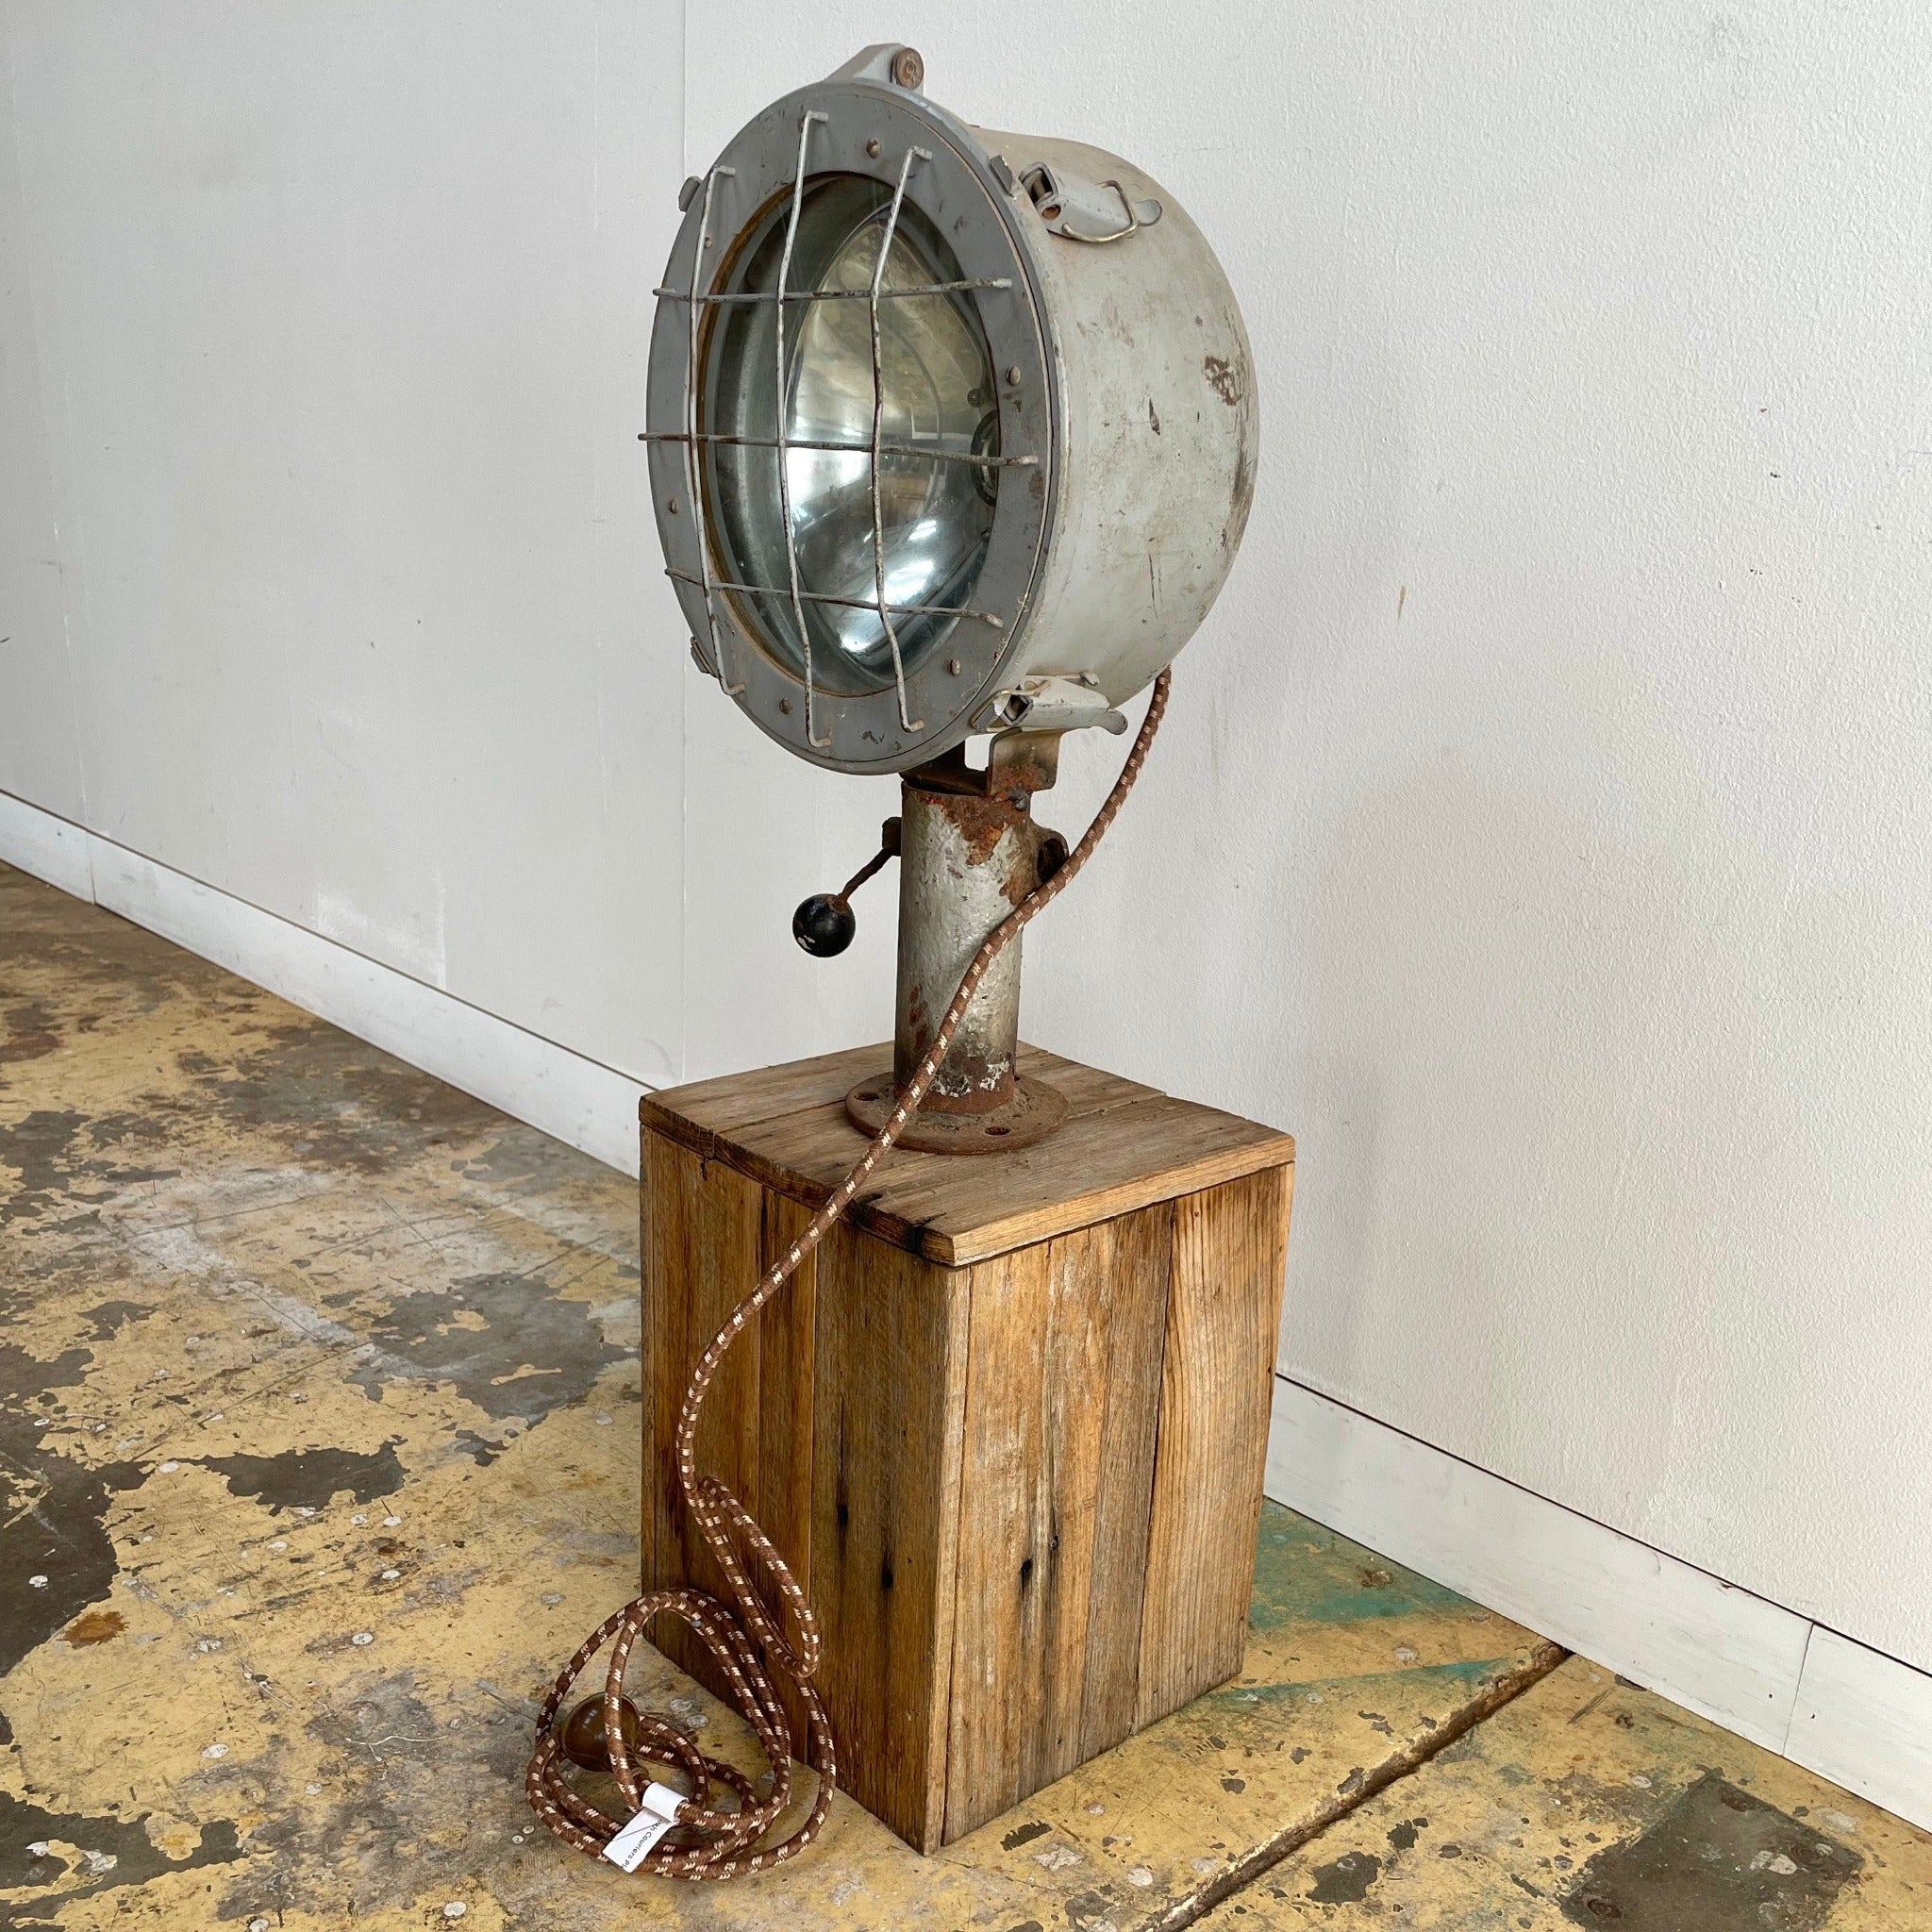 Grey vintage ship light, can be affixed to table or floor. Australia